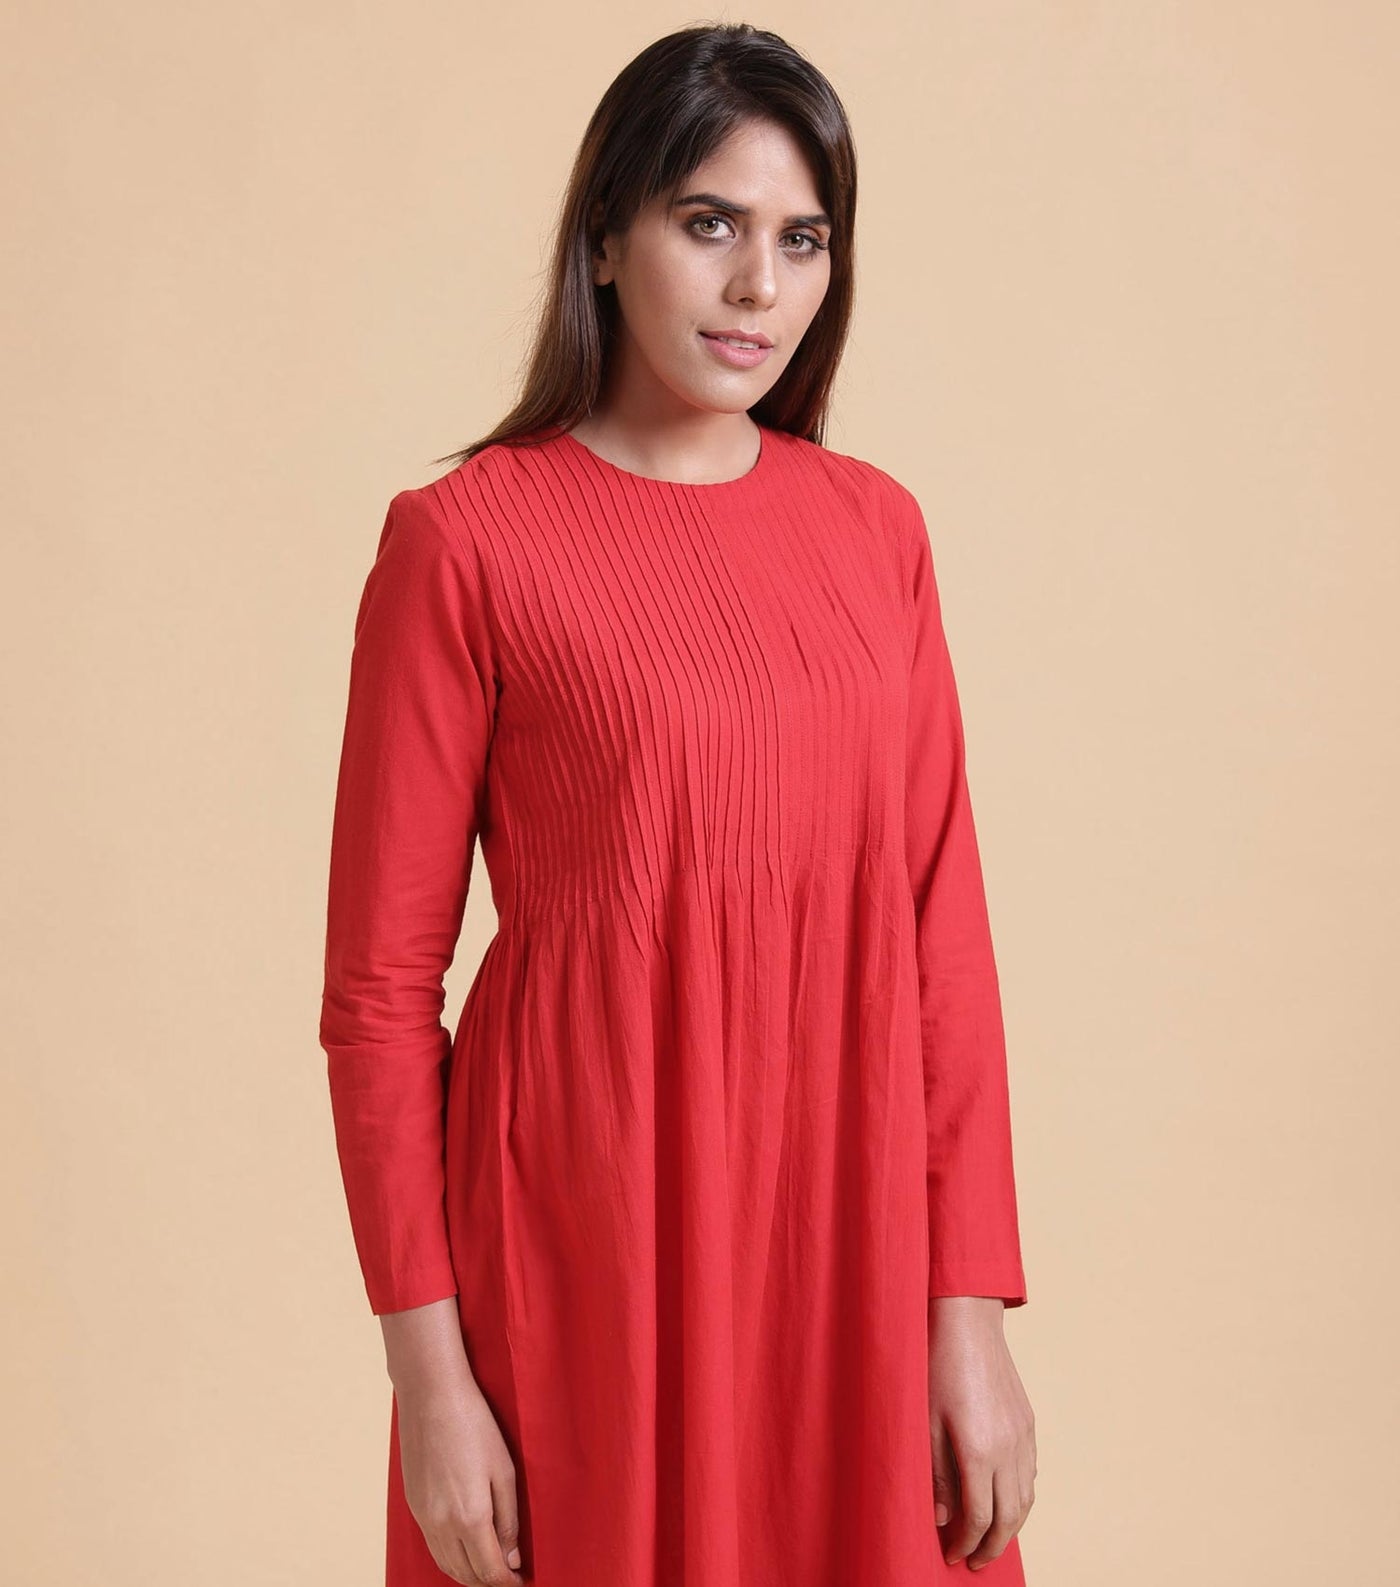 Red pleated cotton dress